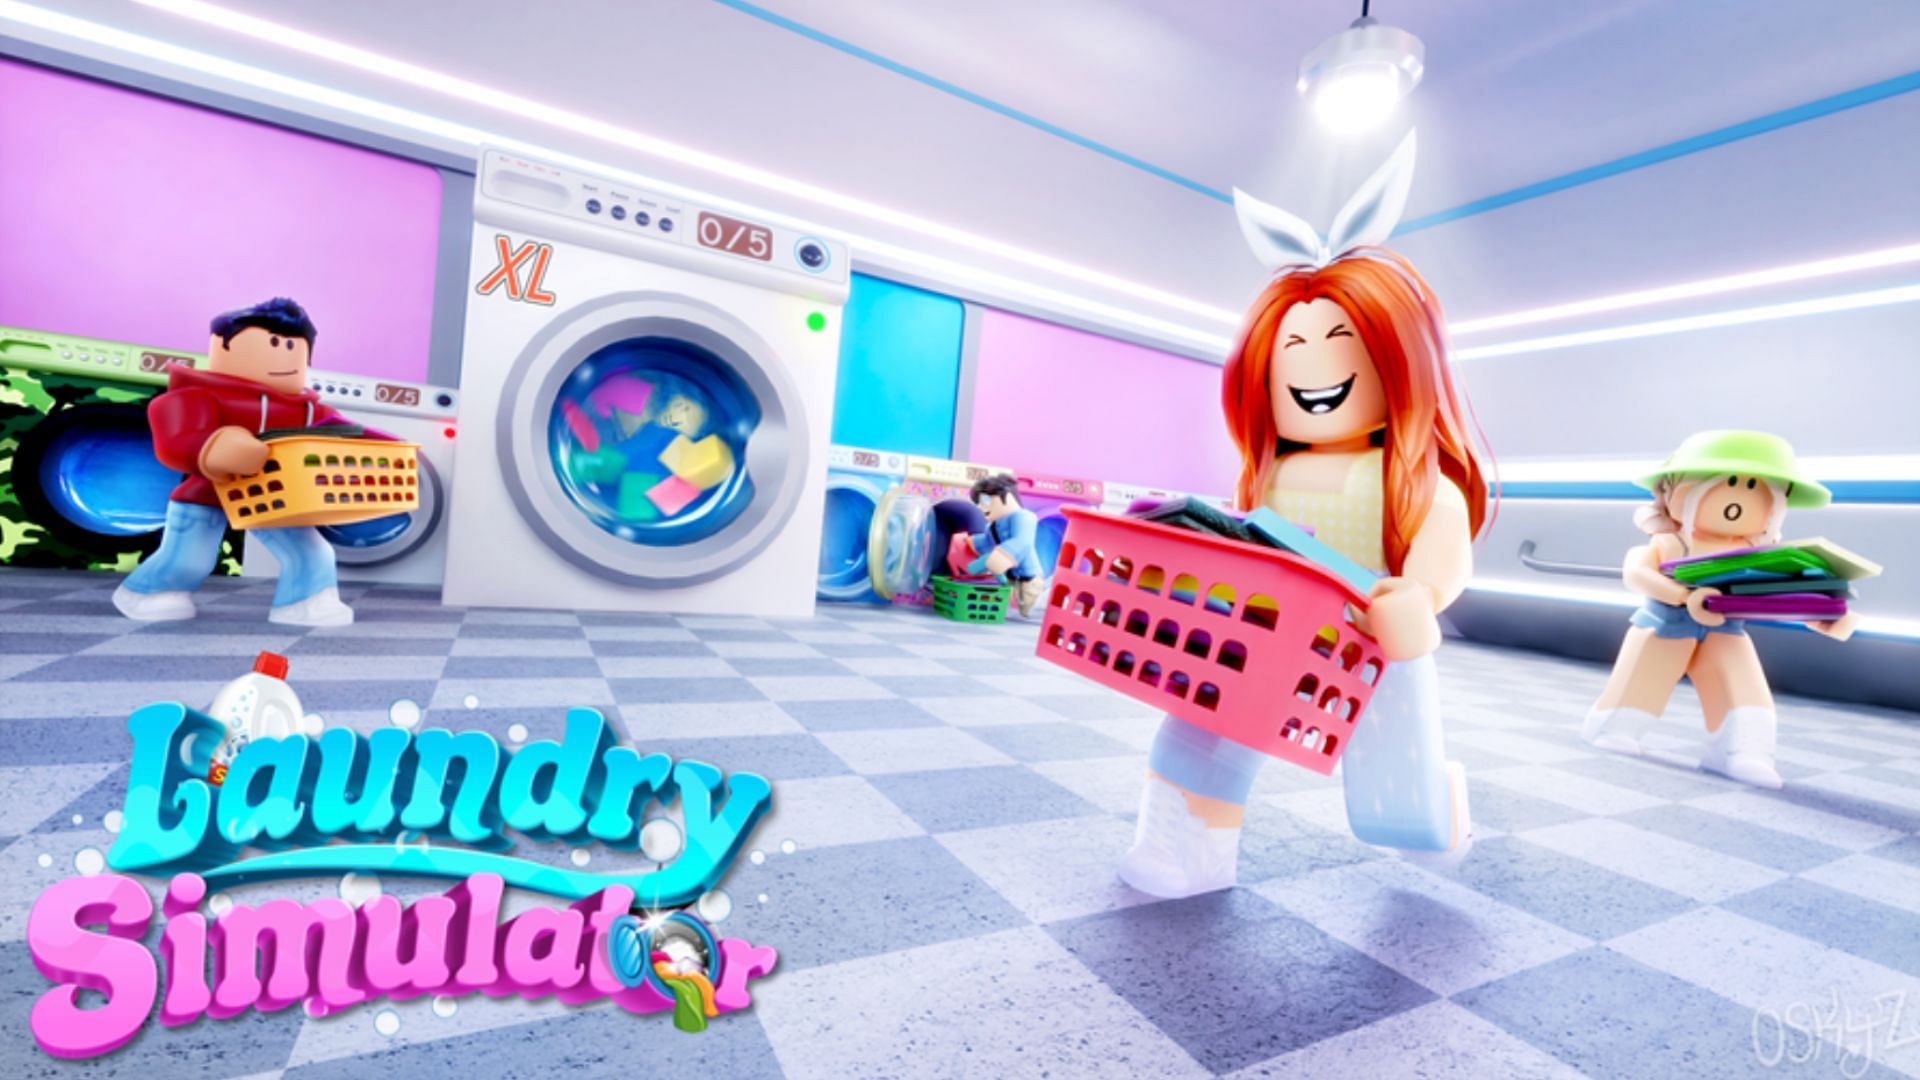 Does Laundry Simulator have any codes? (Image via Roblox)